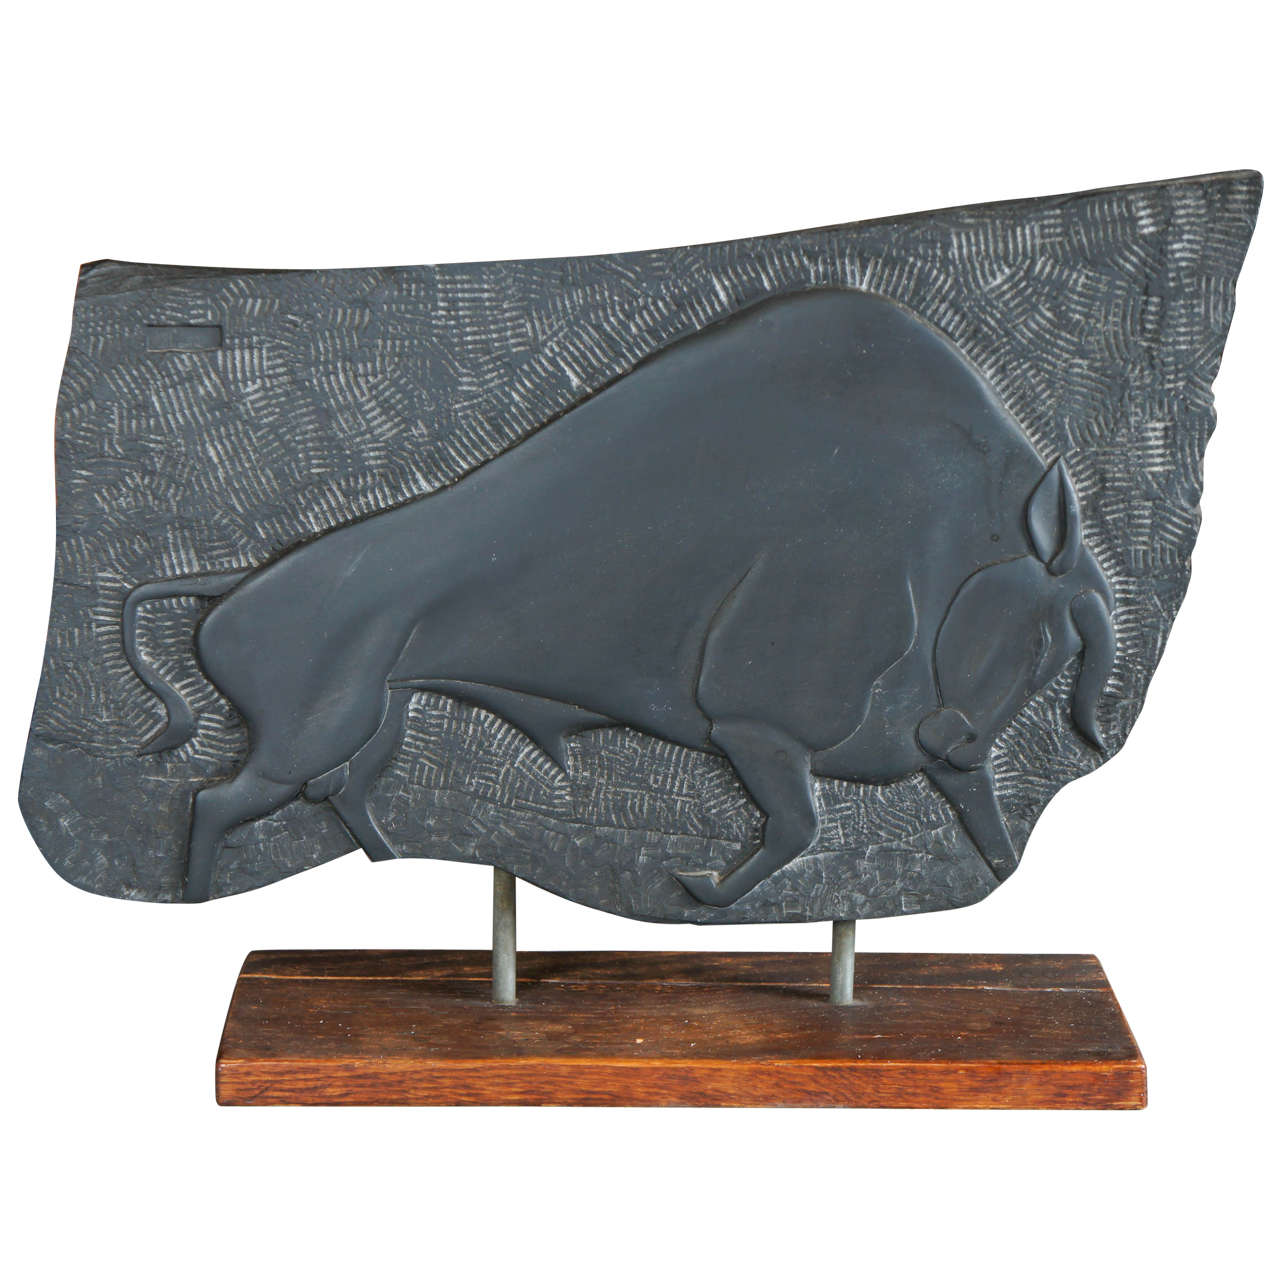 Slate Stone Carved Bull, Williams For Sale